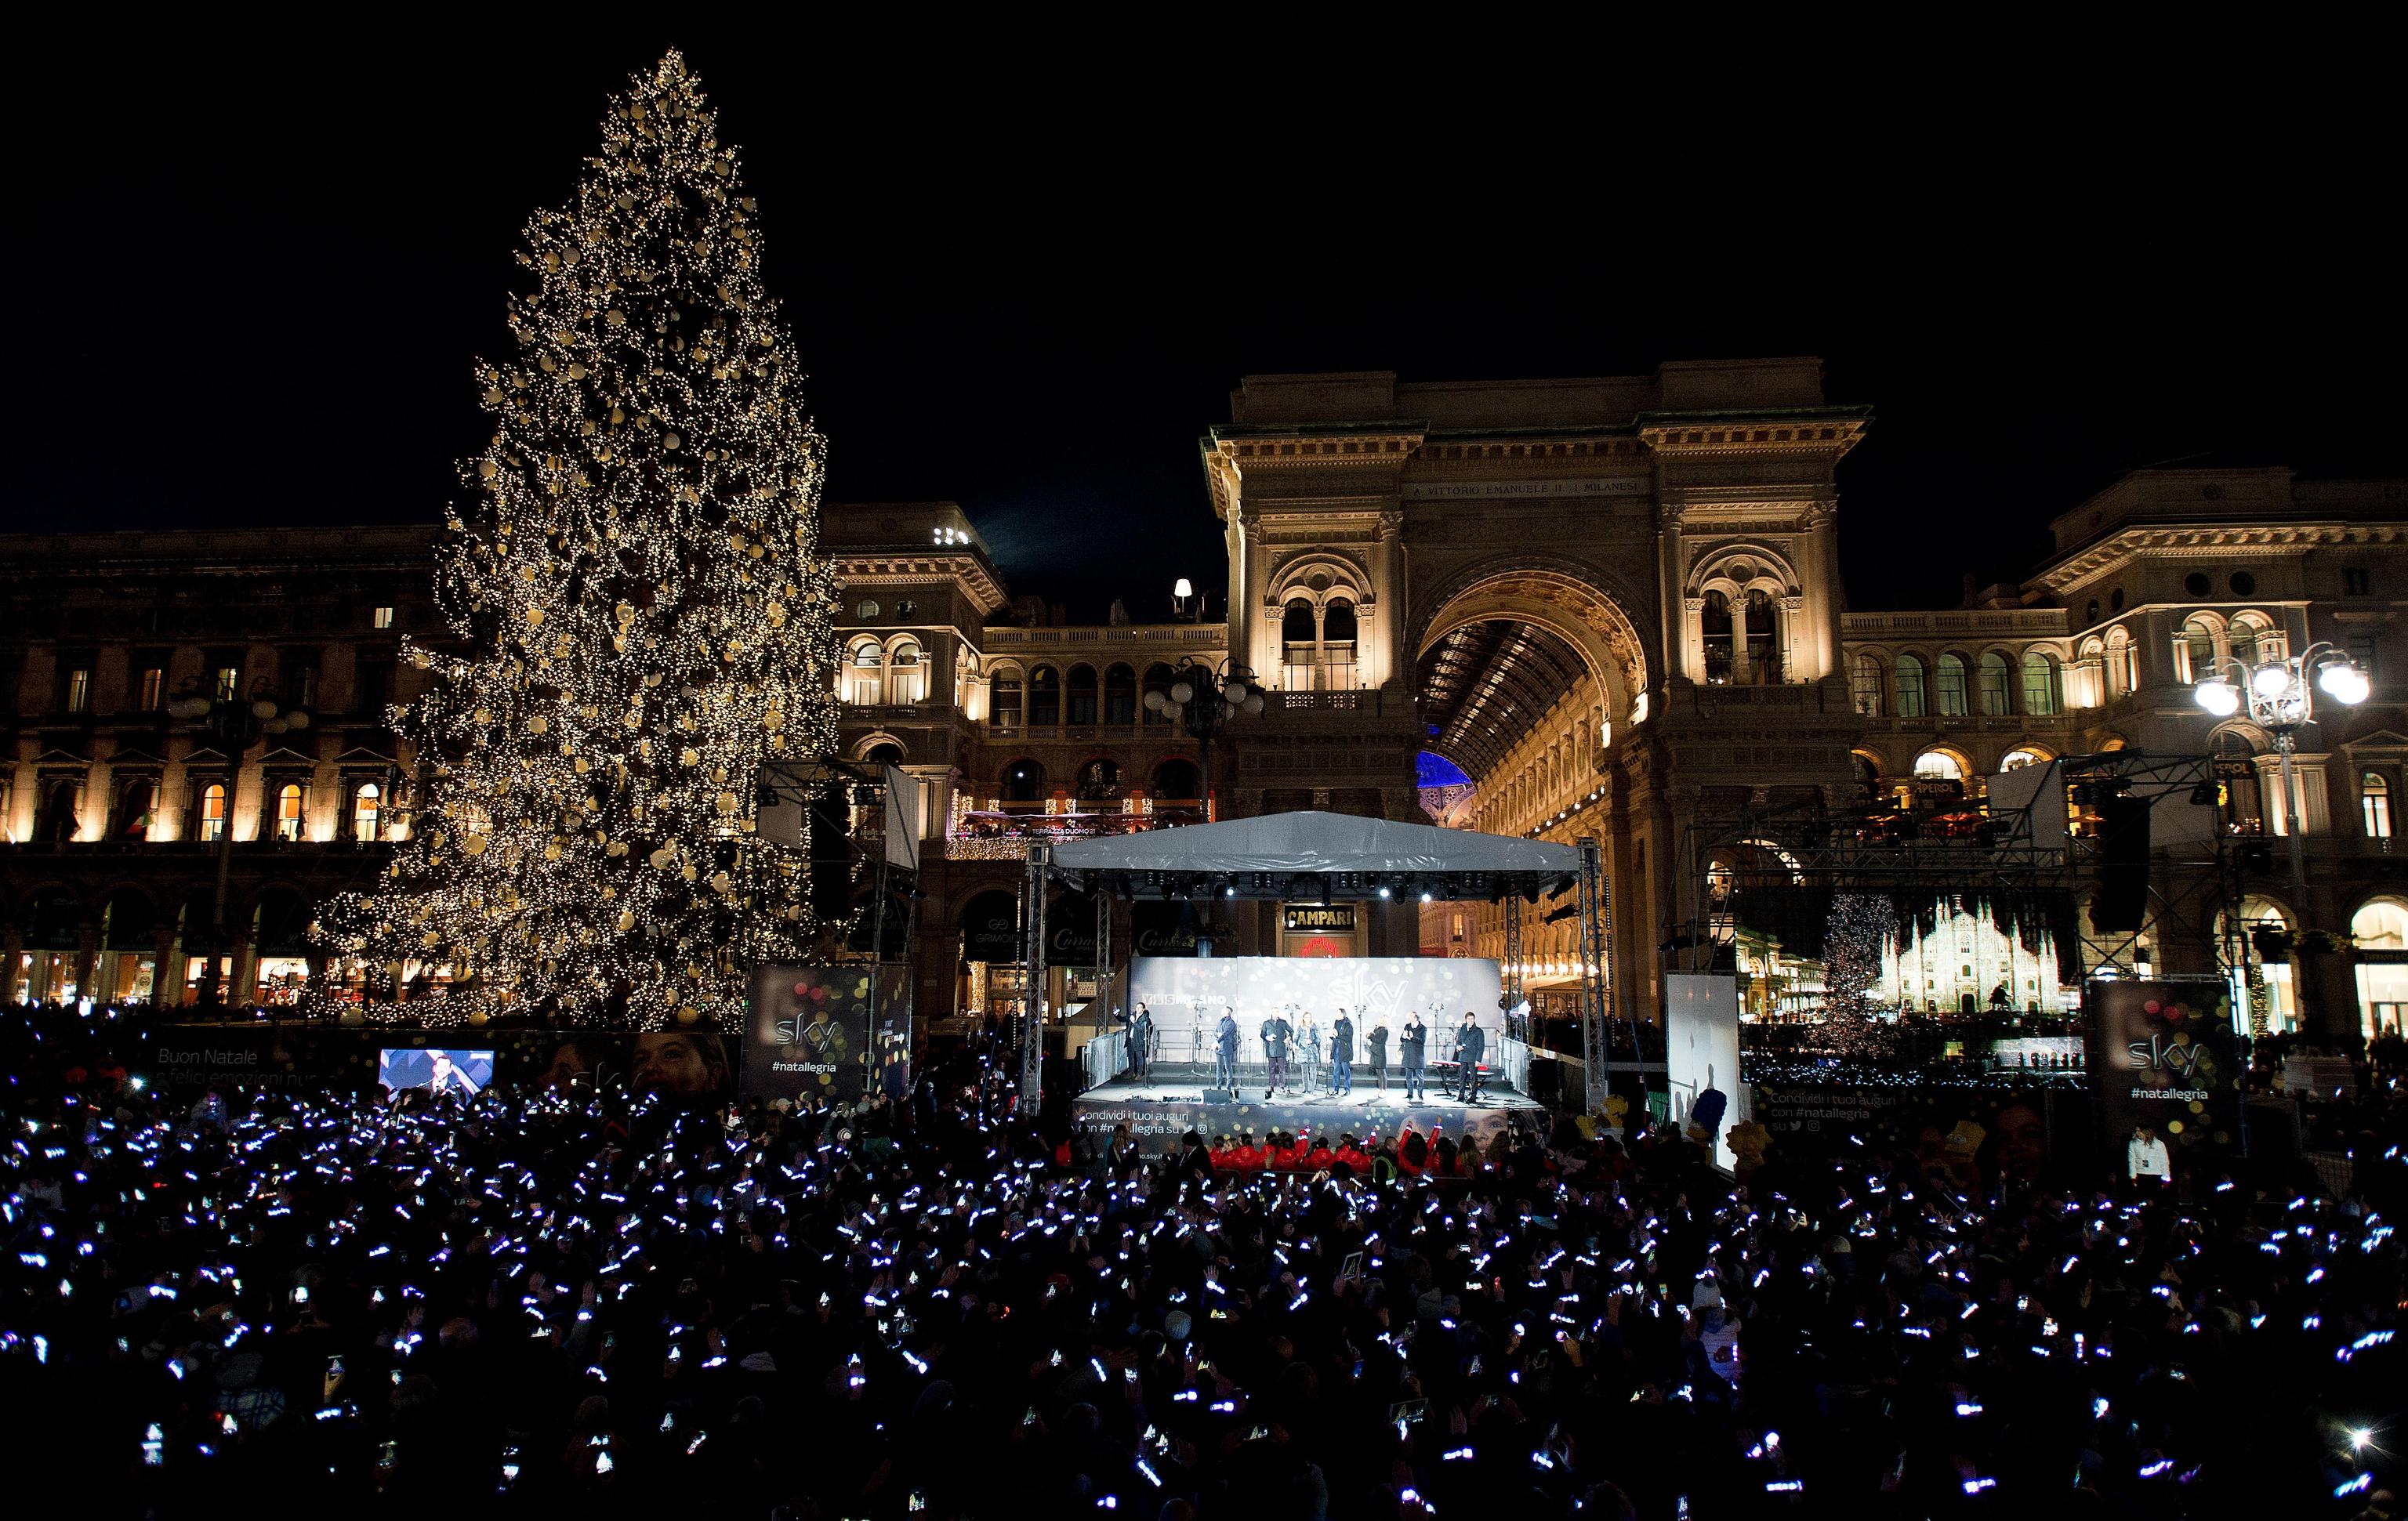 People attend the Christmas tree lighting ceremony at Duomo's square in Milan, Italy, 06 December 2017.
ANSA/SKY PRESS OFFICE/JULE HERING
+++ ANSA PROVIDES ACCESS TO THIS HANDOUT PHOTO TO BE USED SOLELY TO ILLUSTRATE NEWS REPORTING OR COMMENTARY ON THE FACTS OR EVENTS DEPICTED IN THIS IMAGE; NO ARCHIVING; NO LICENSING +++